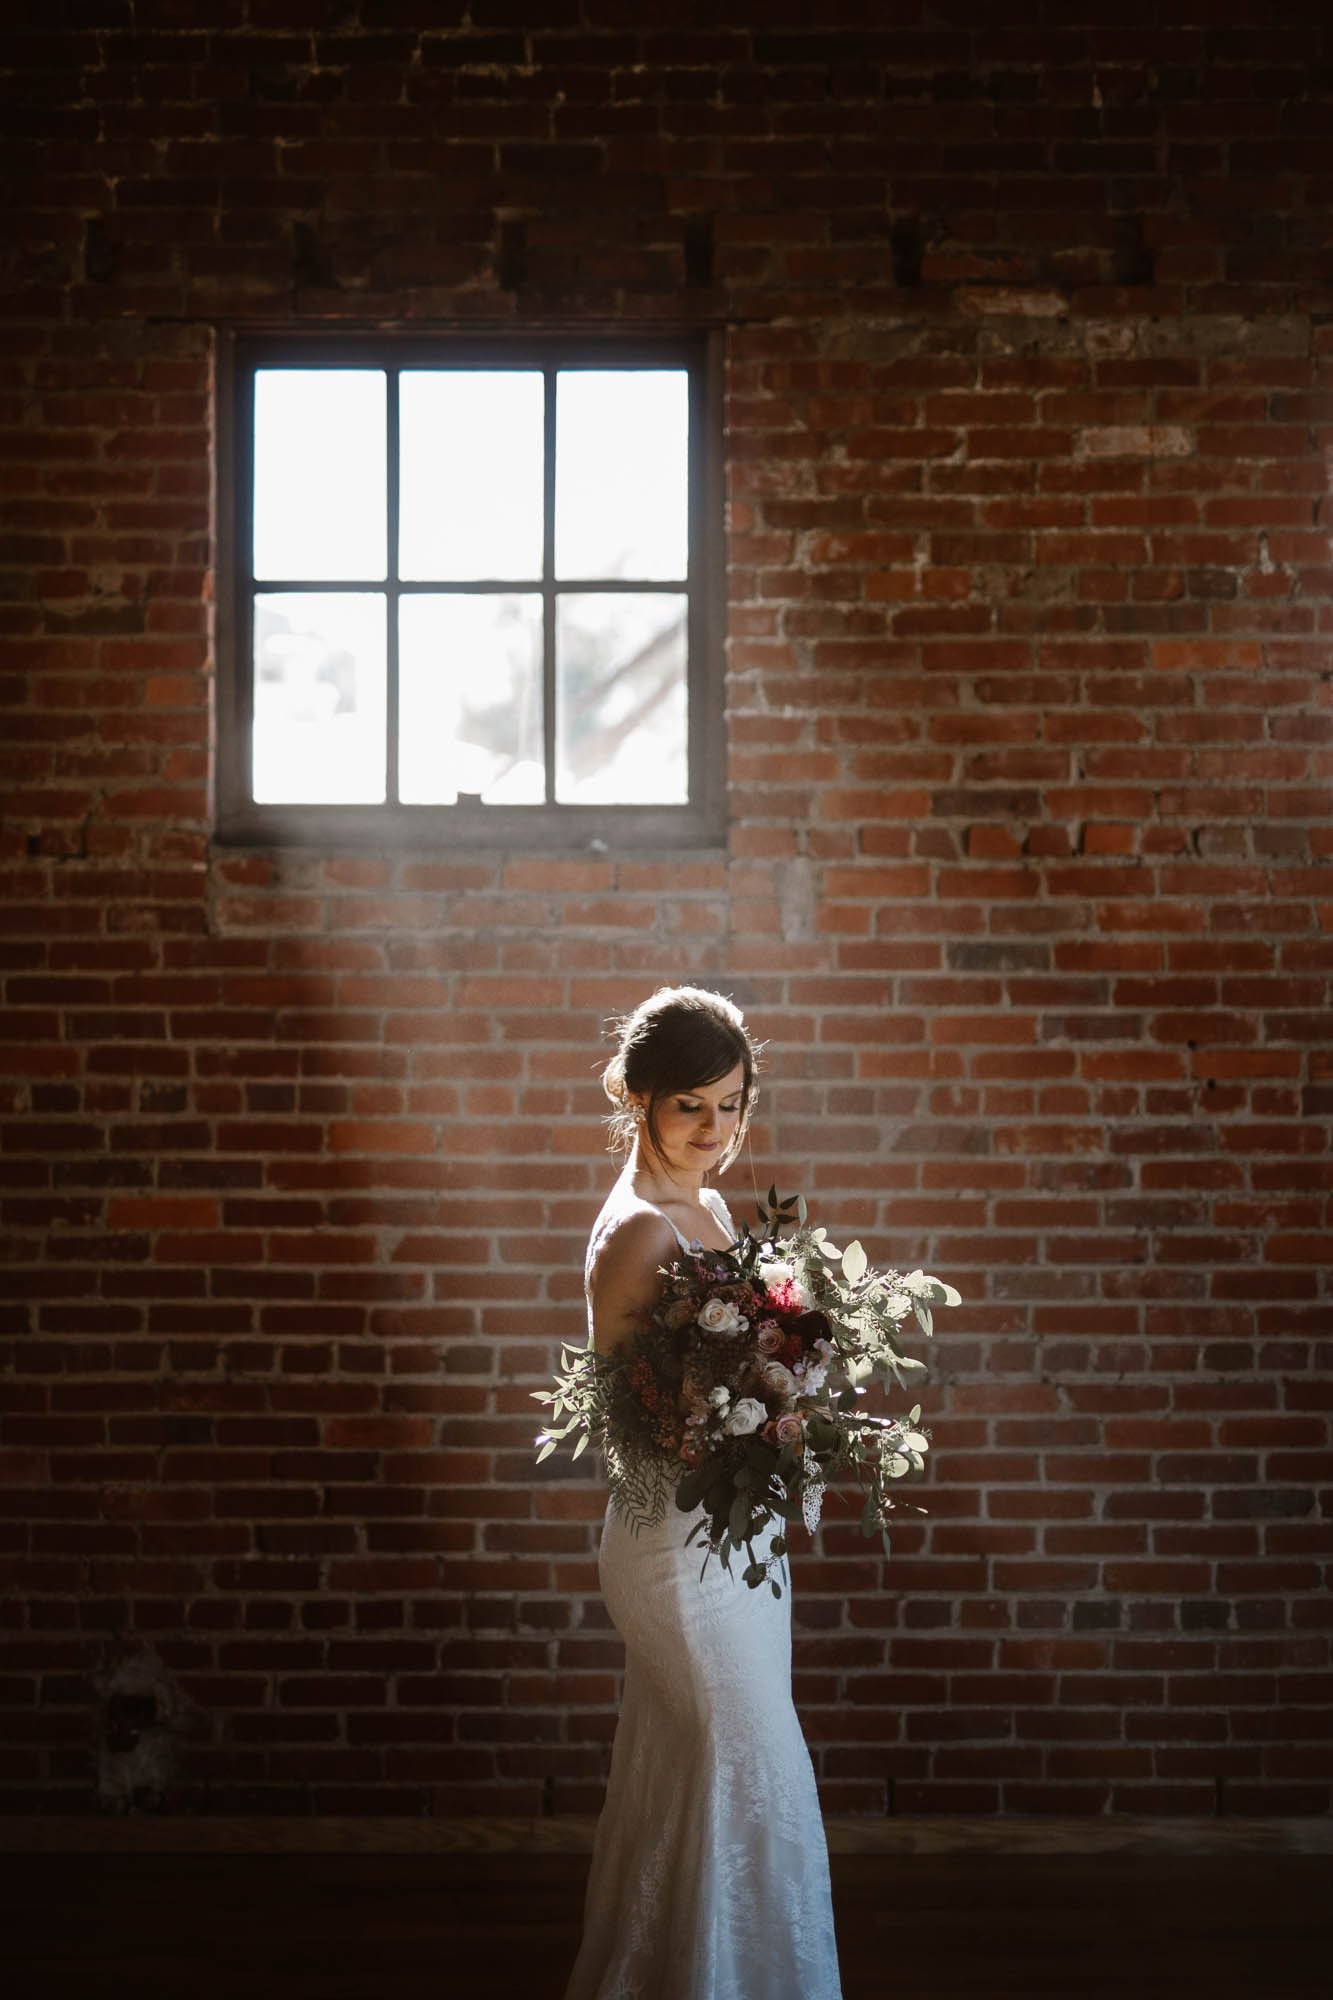 How To Plan For Good Light On Your Wedding Day